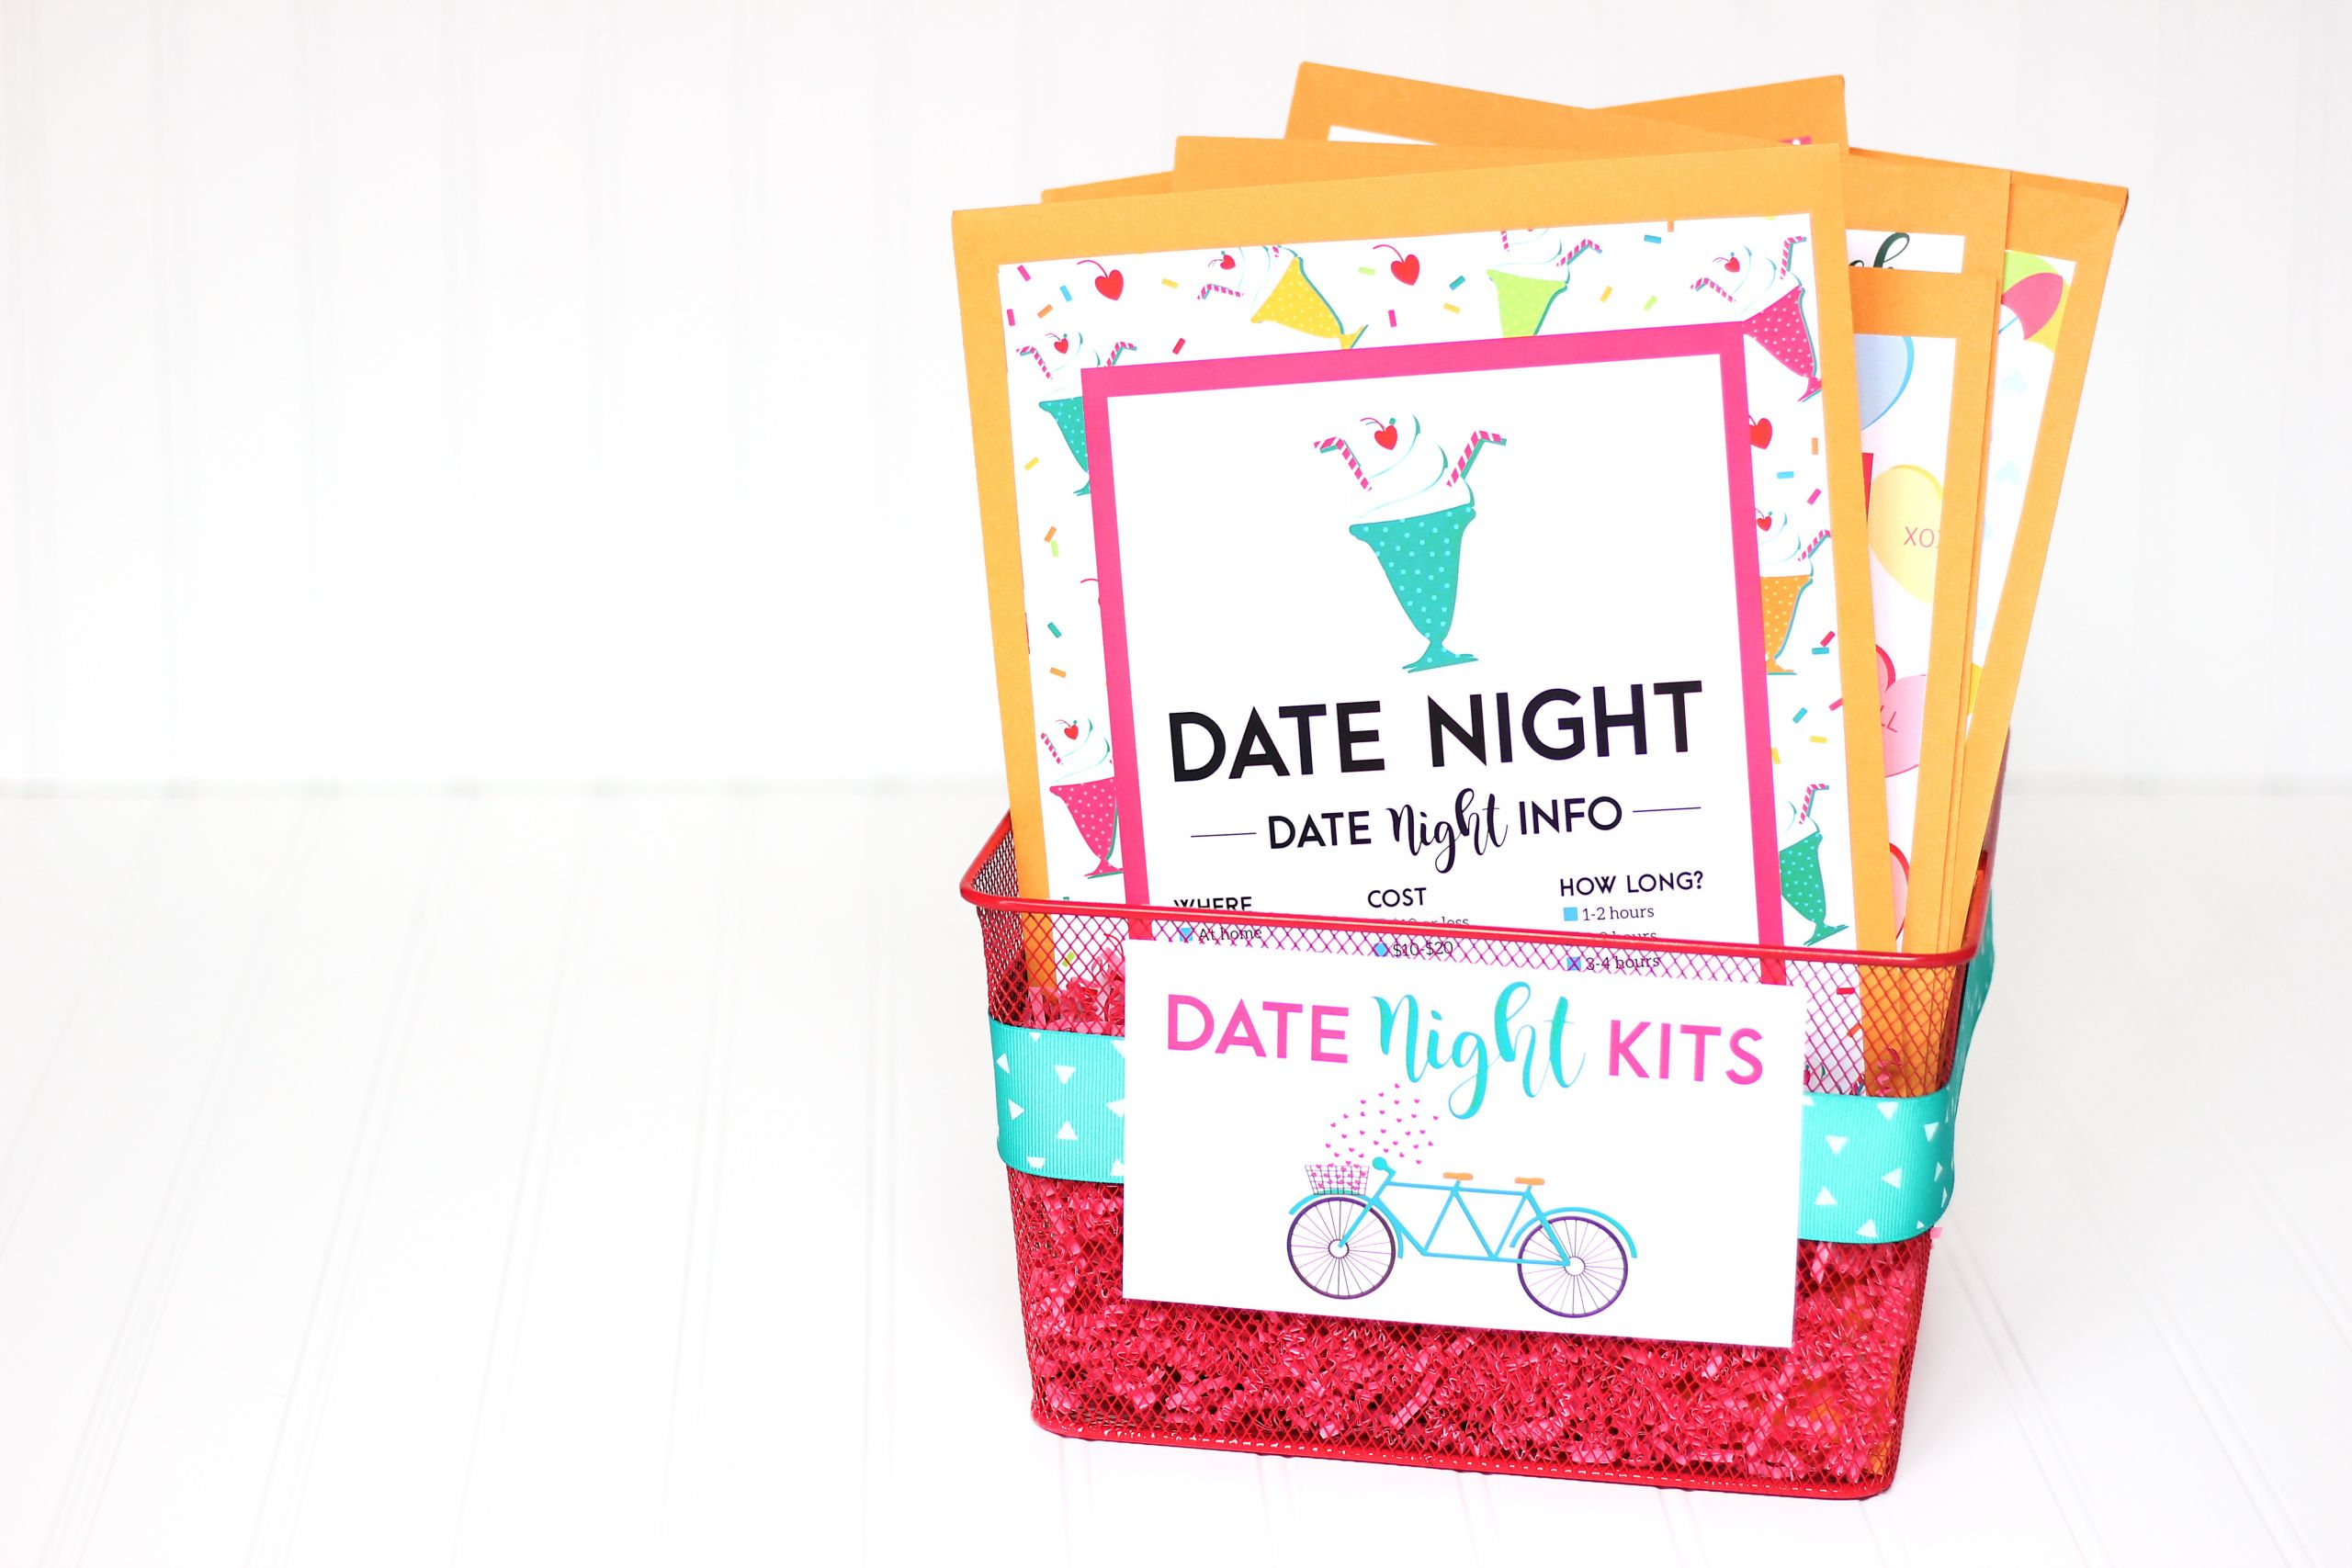 Gift Basket Ideas For Bridal Showers
 The Best Bridal Shower Gift Ideas from The Dating Divas